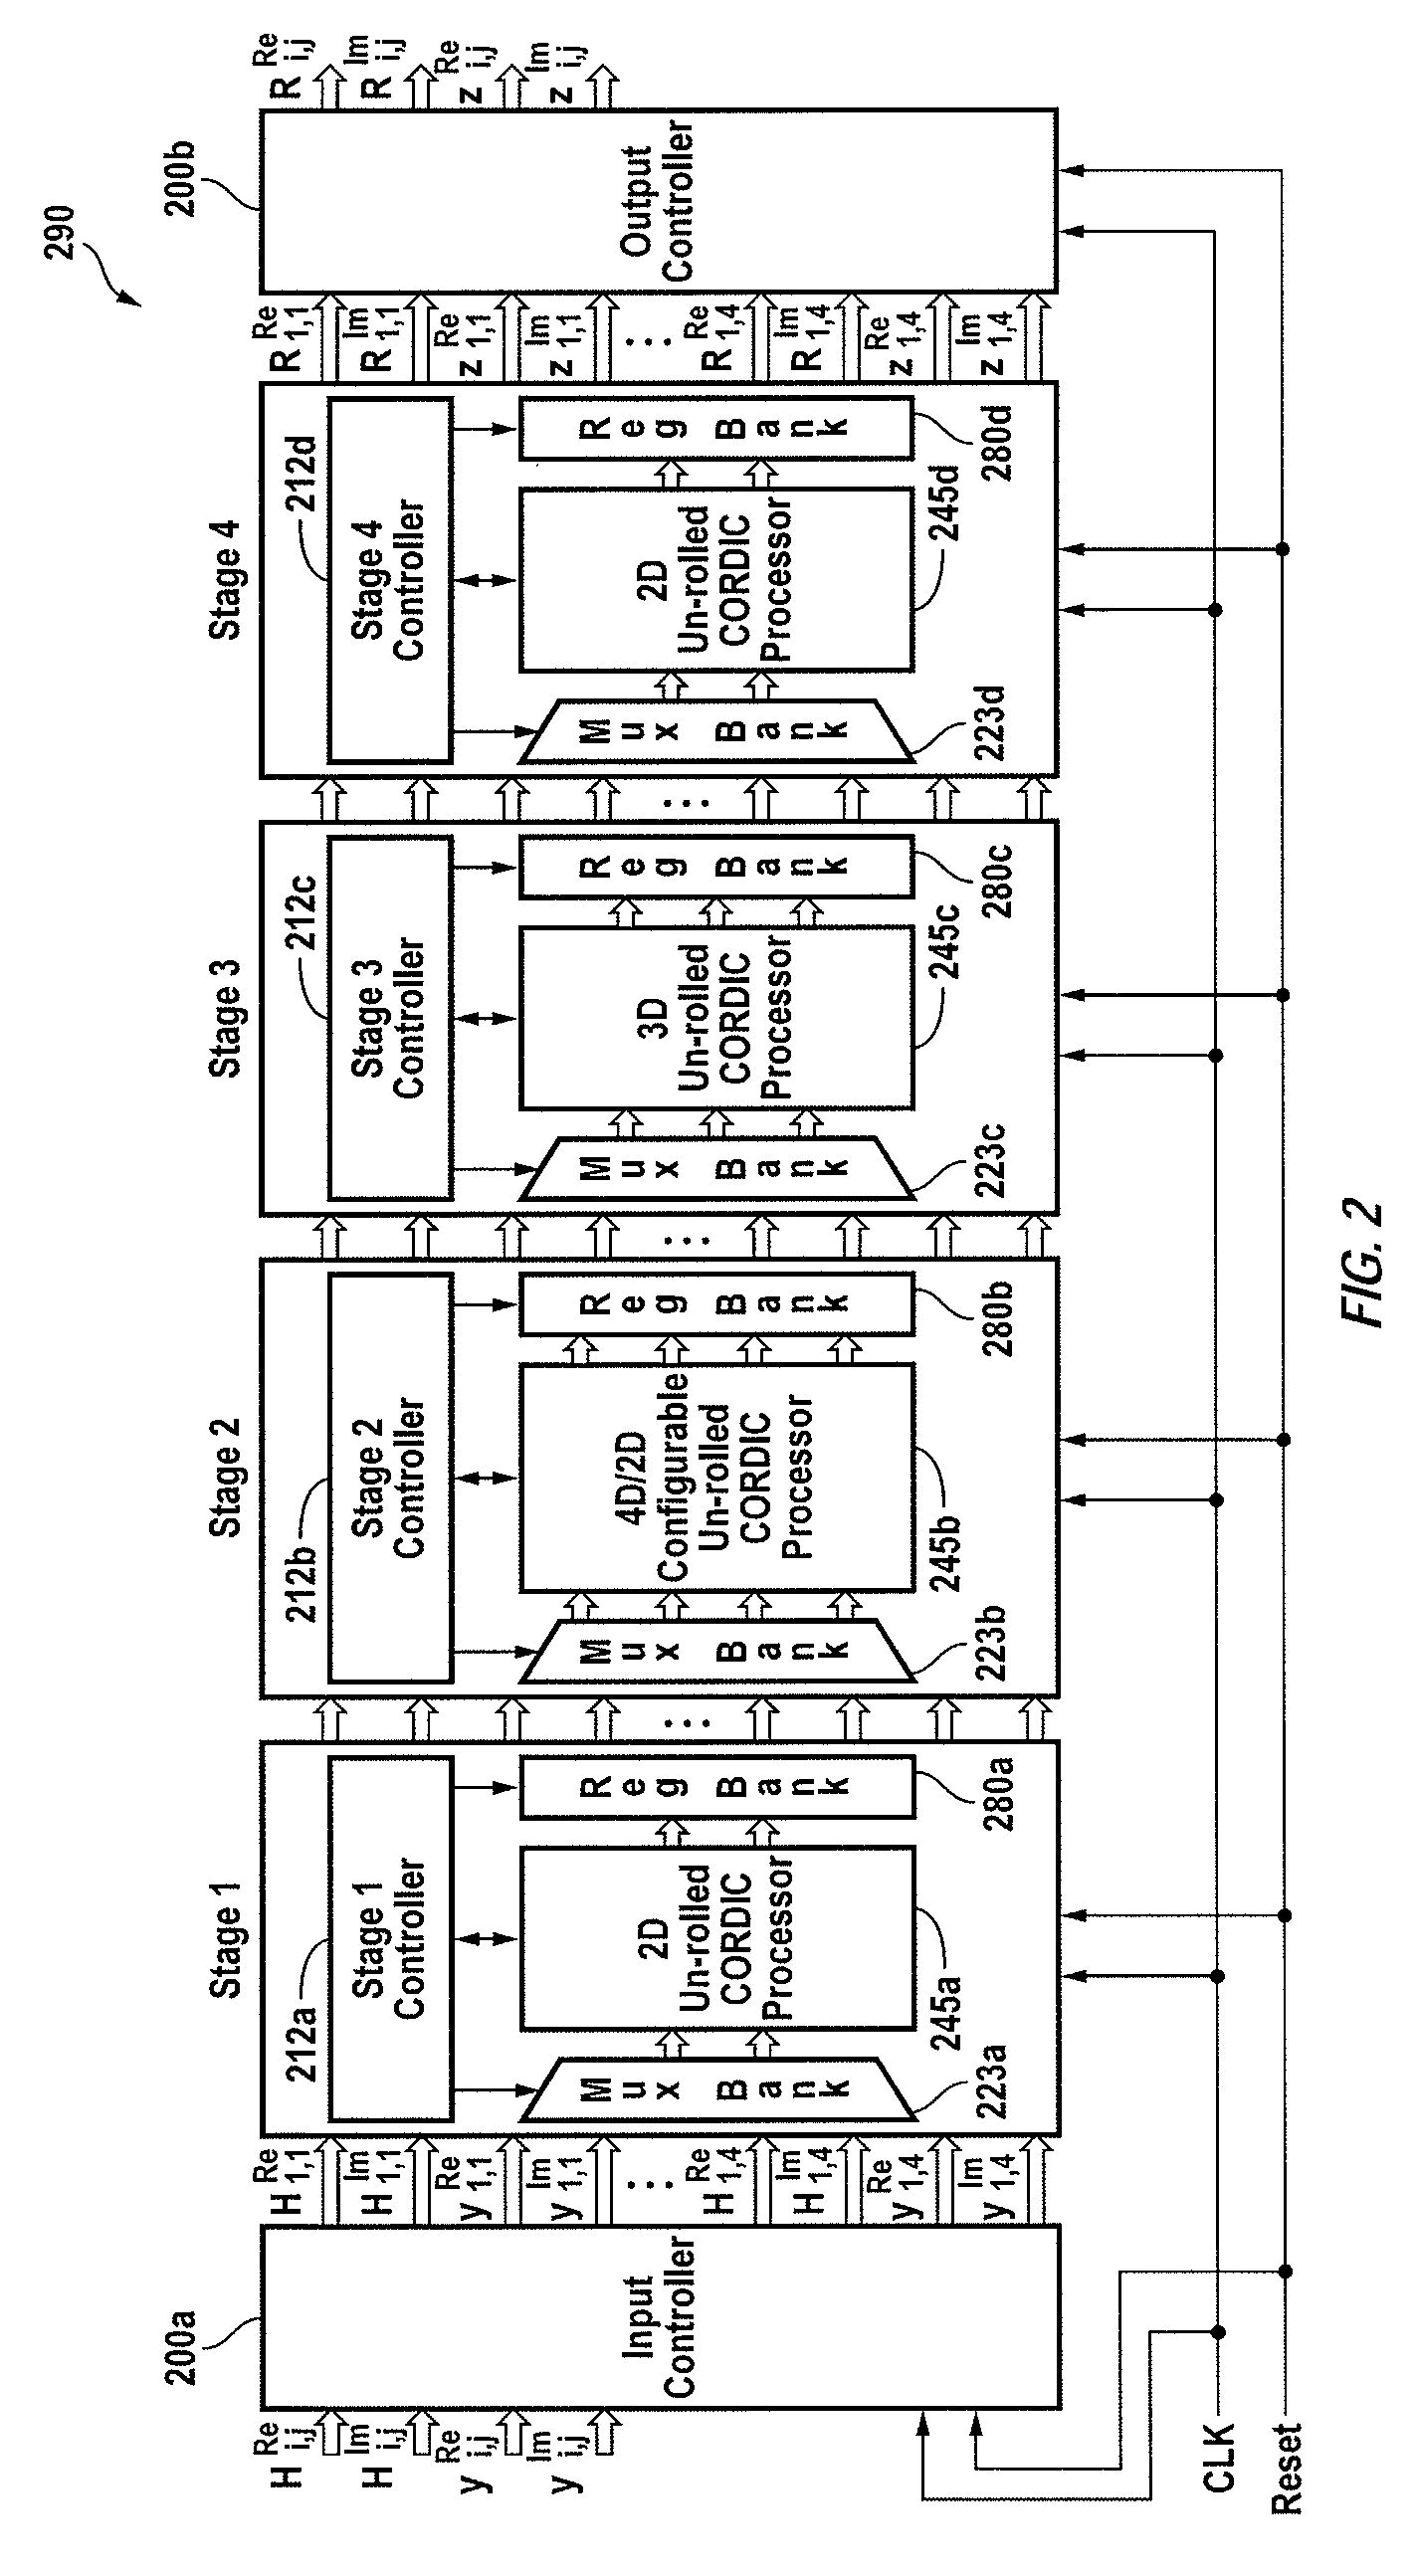 Signal processing block for a receiver in wireless communication